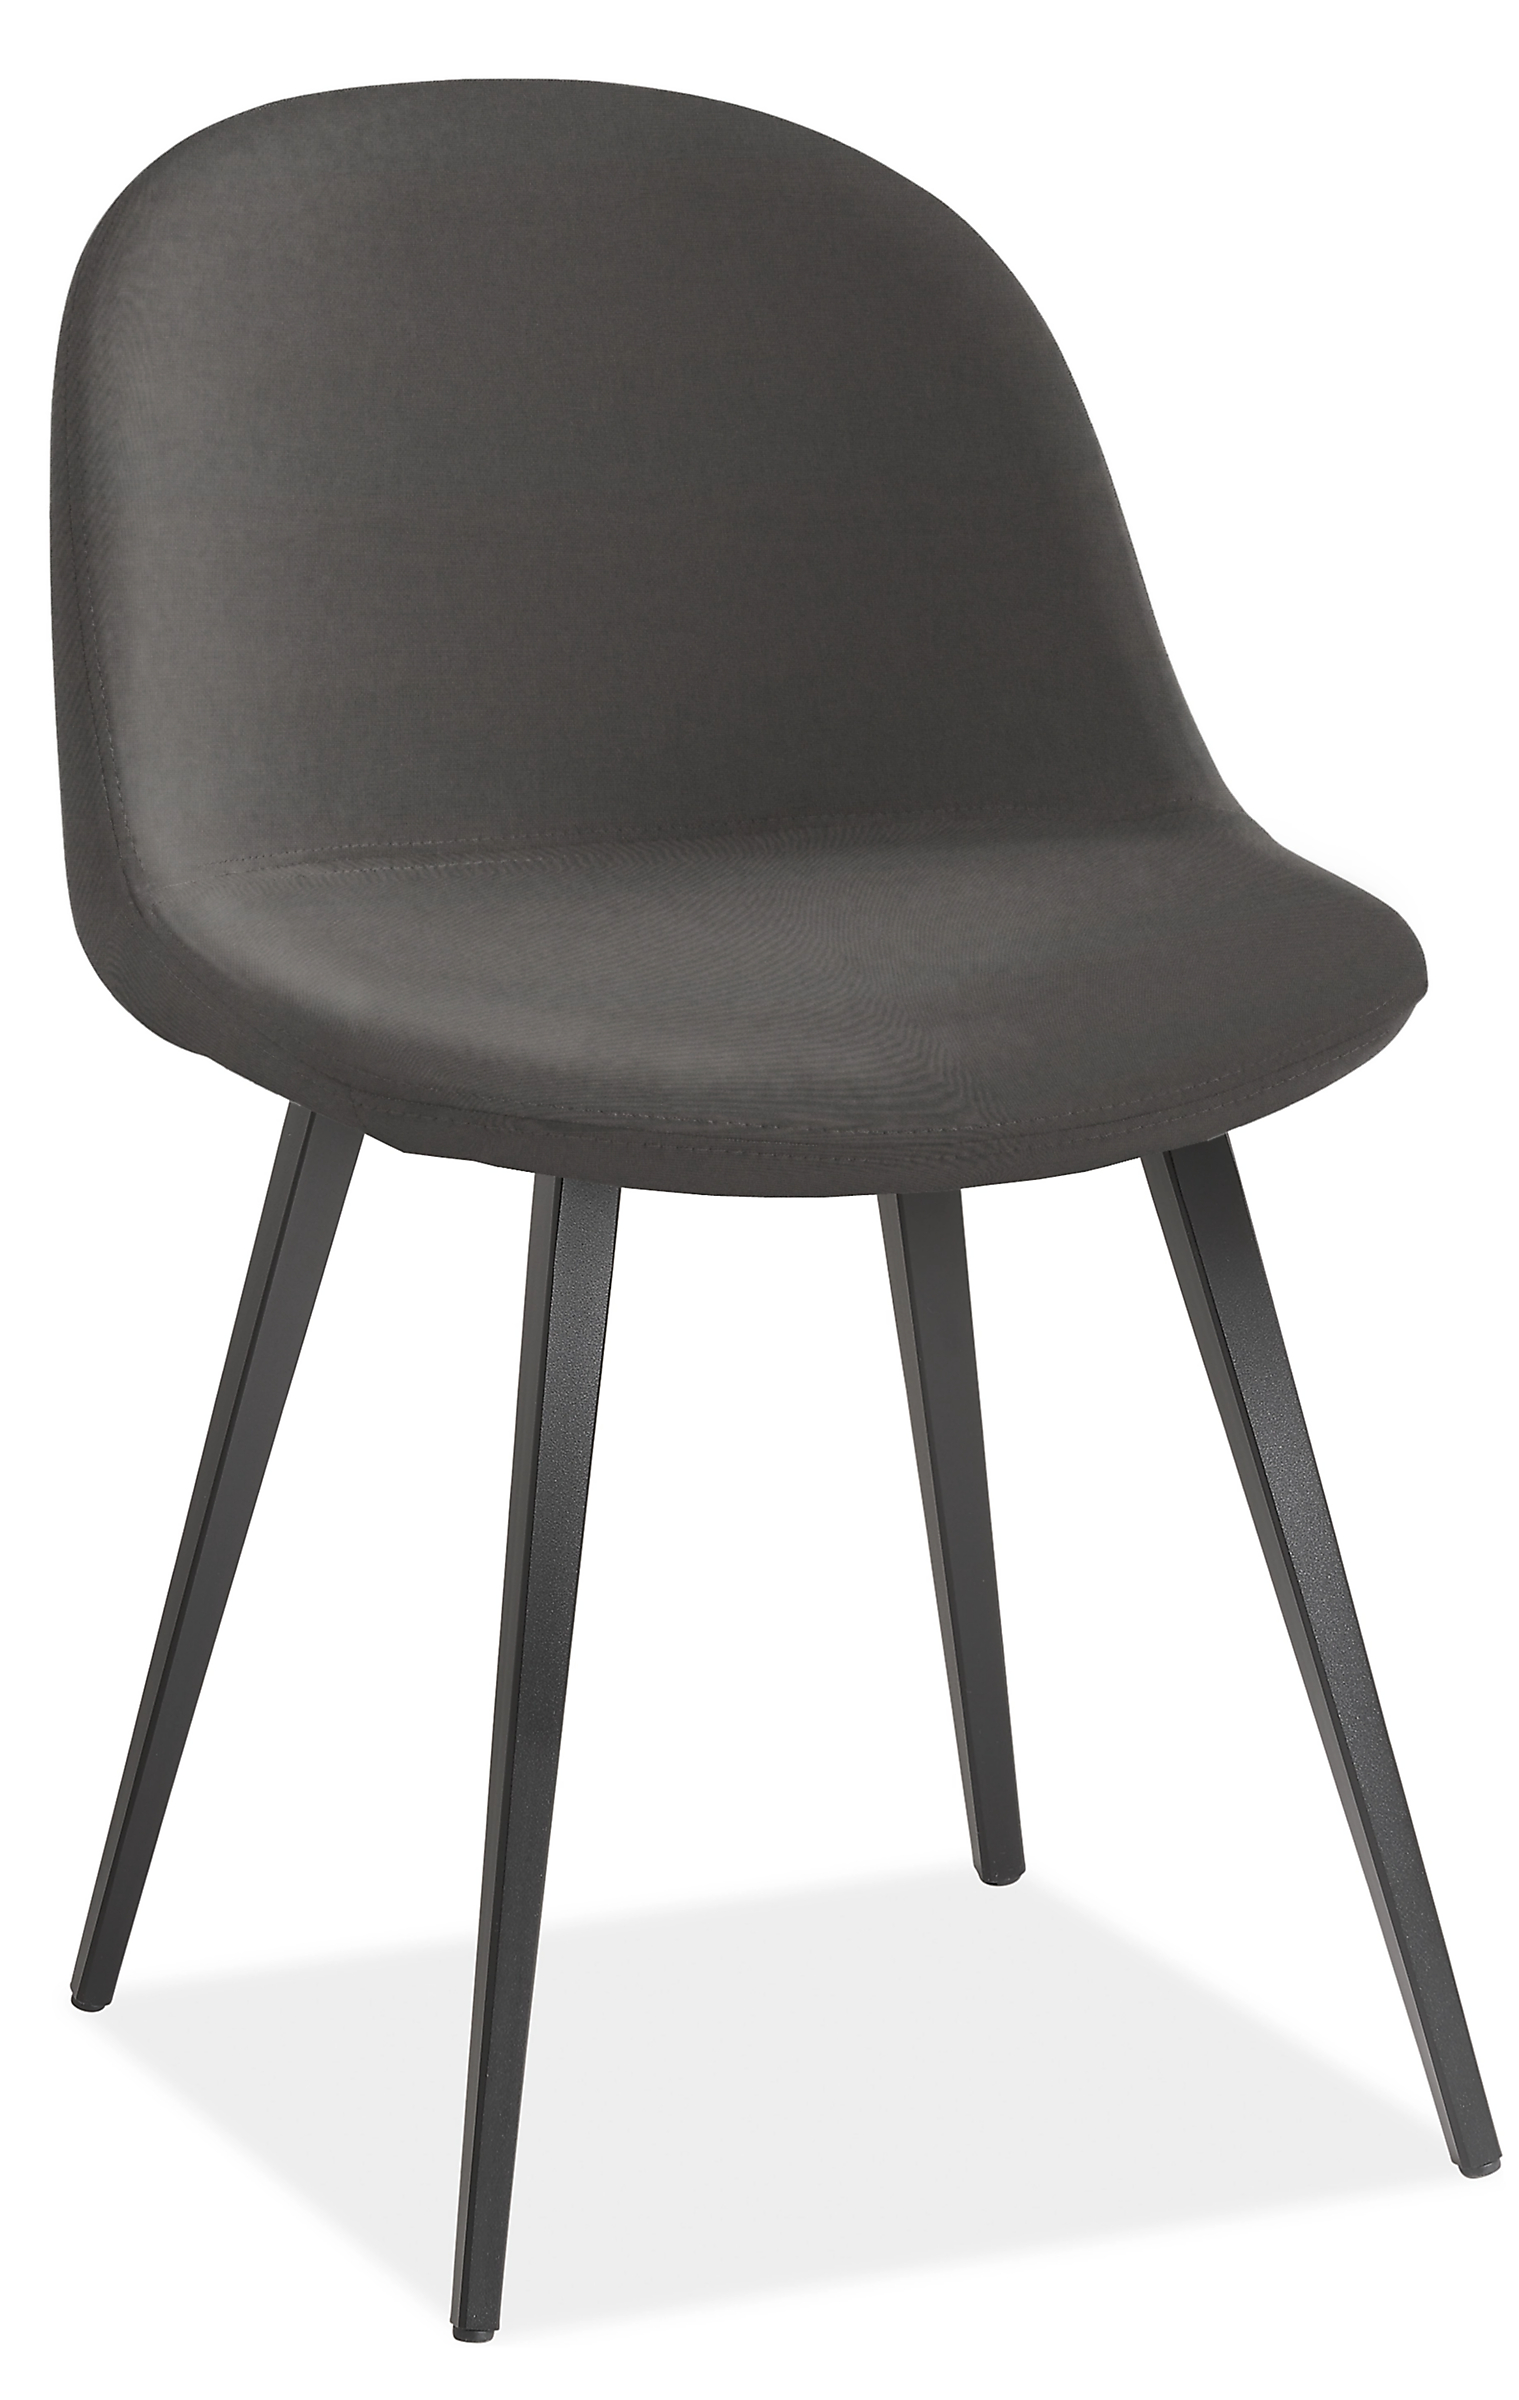 Bernard Dining Chair in Creel Charcoal Fabric with Black Metal Legs